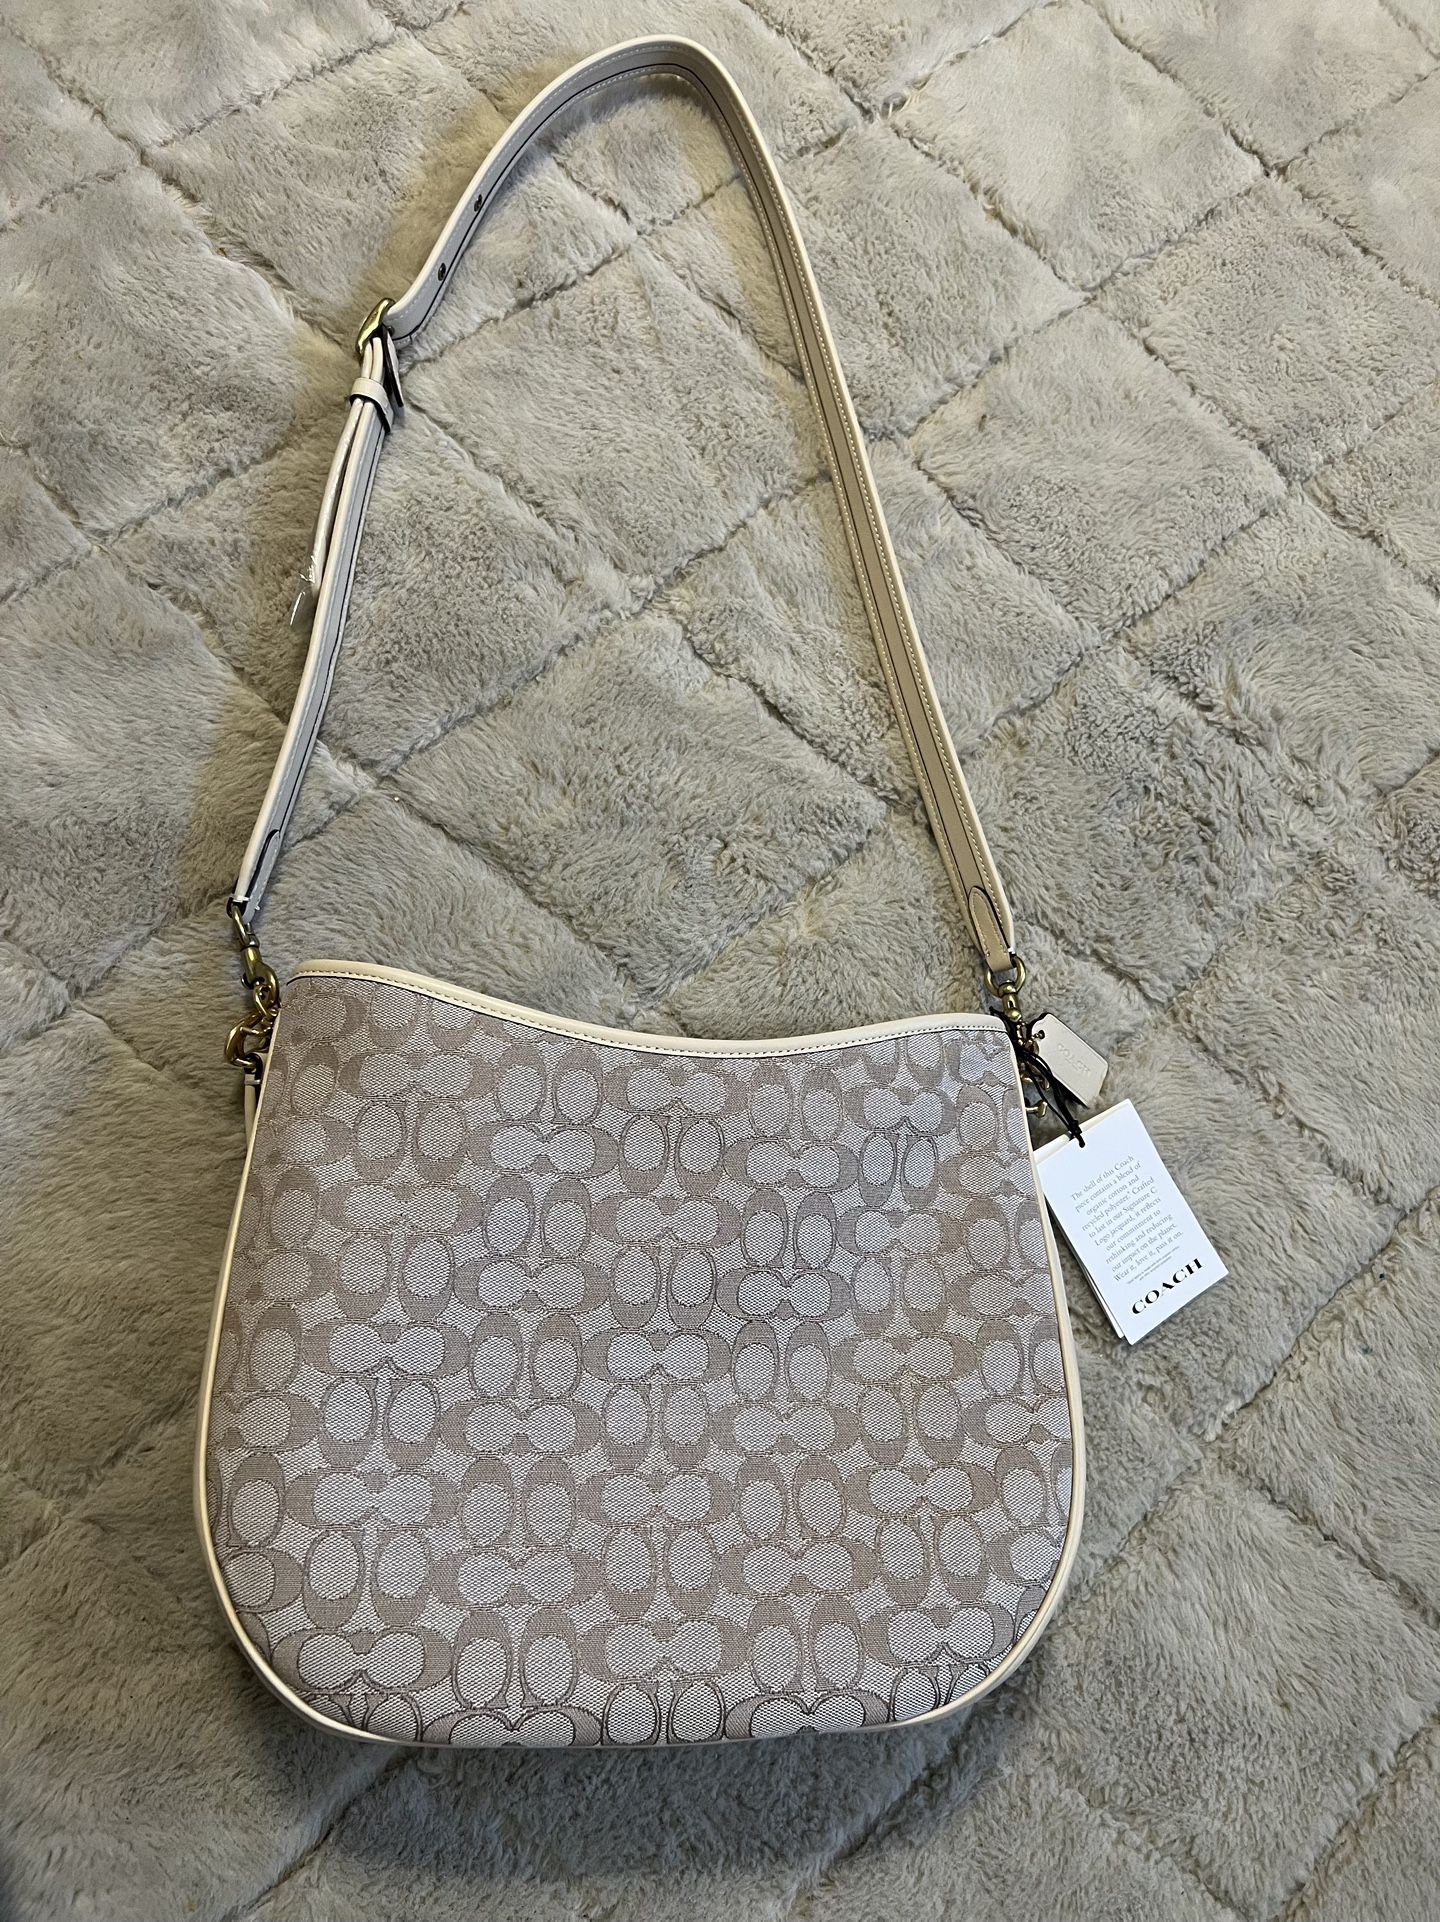 NEW RELEASE COACH SOFT TABBY HOBO IN SIGNATURE JACQUARD BAG